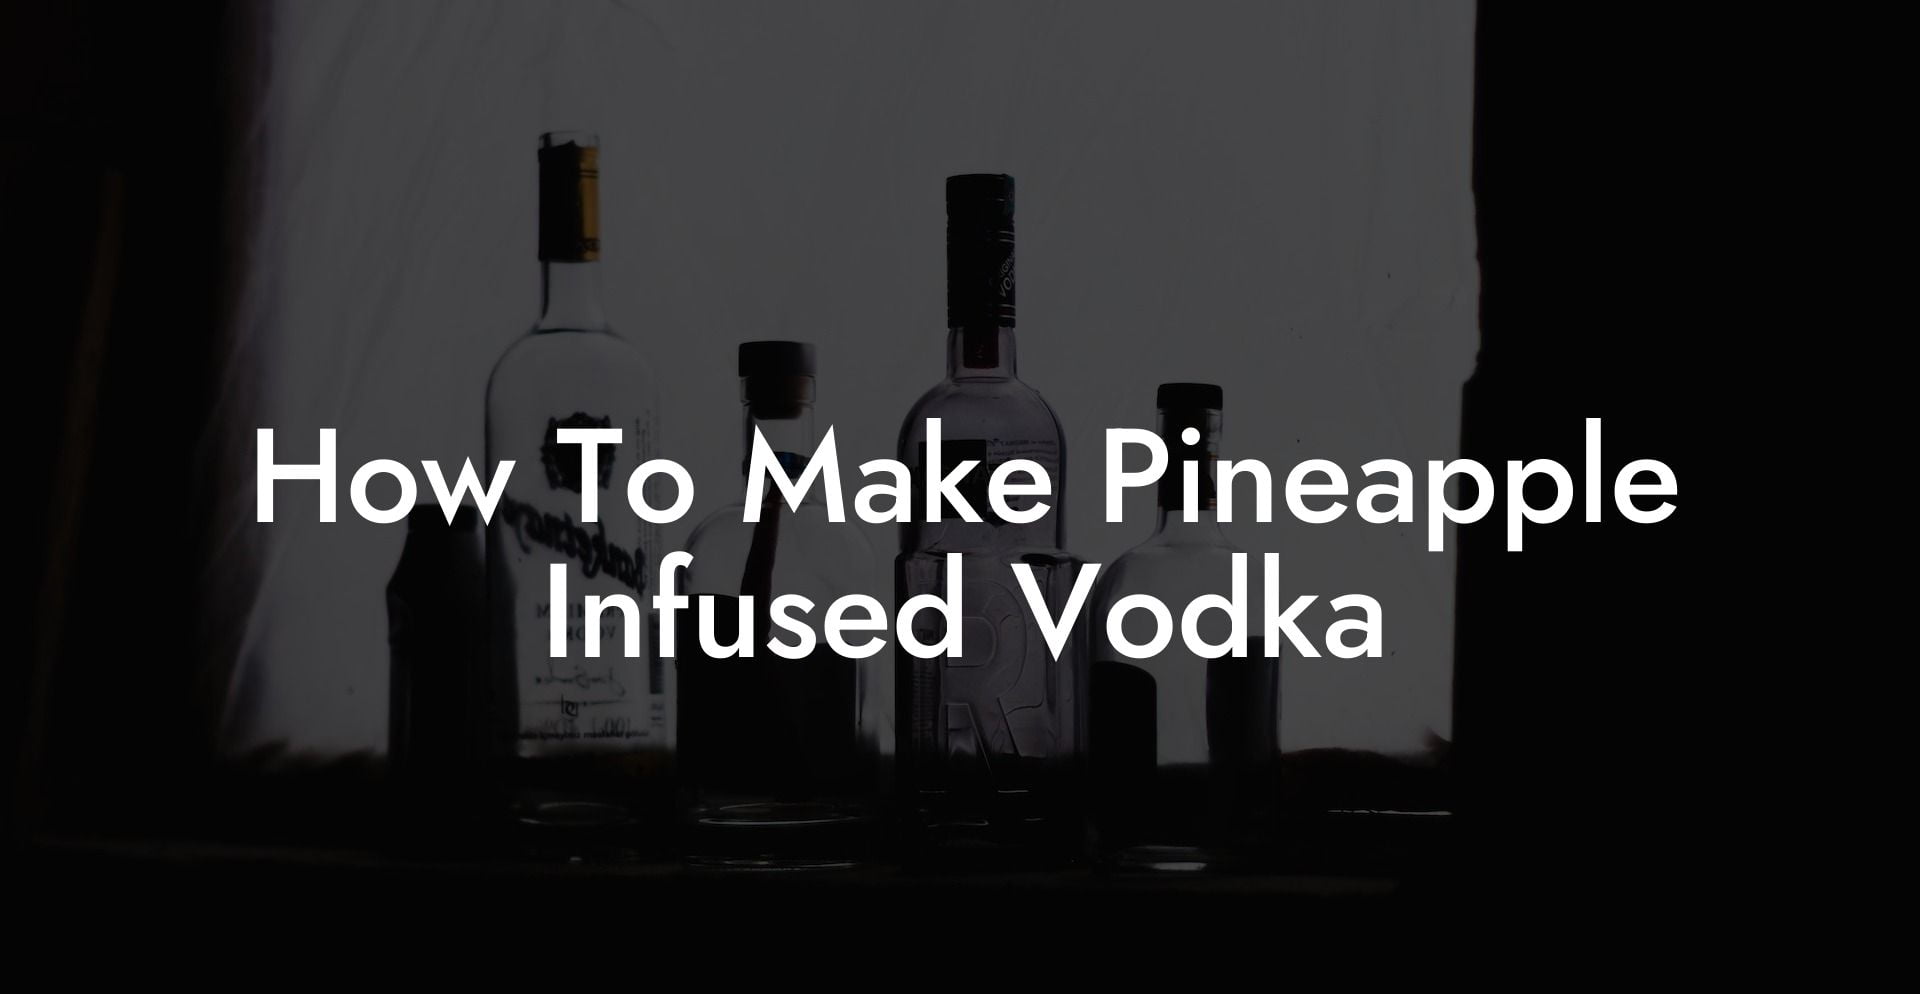 How To Make Pineapple Infused Vodka